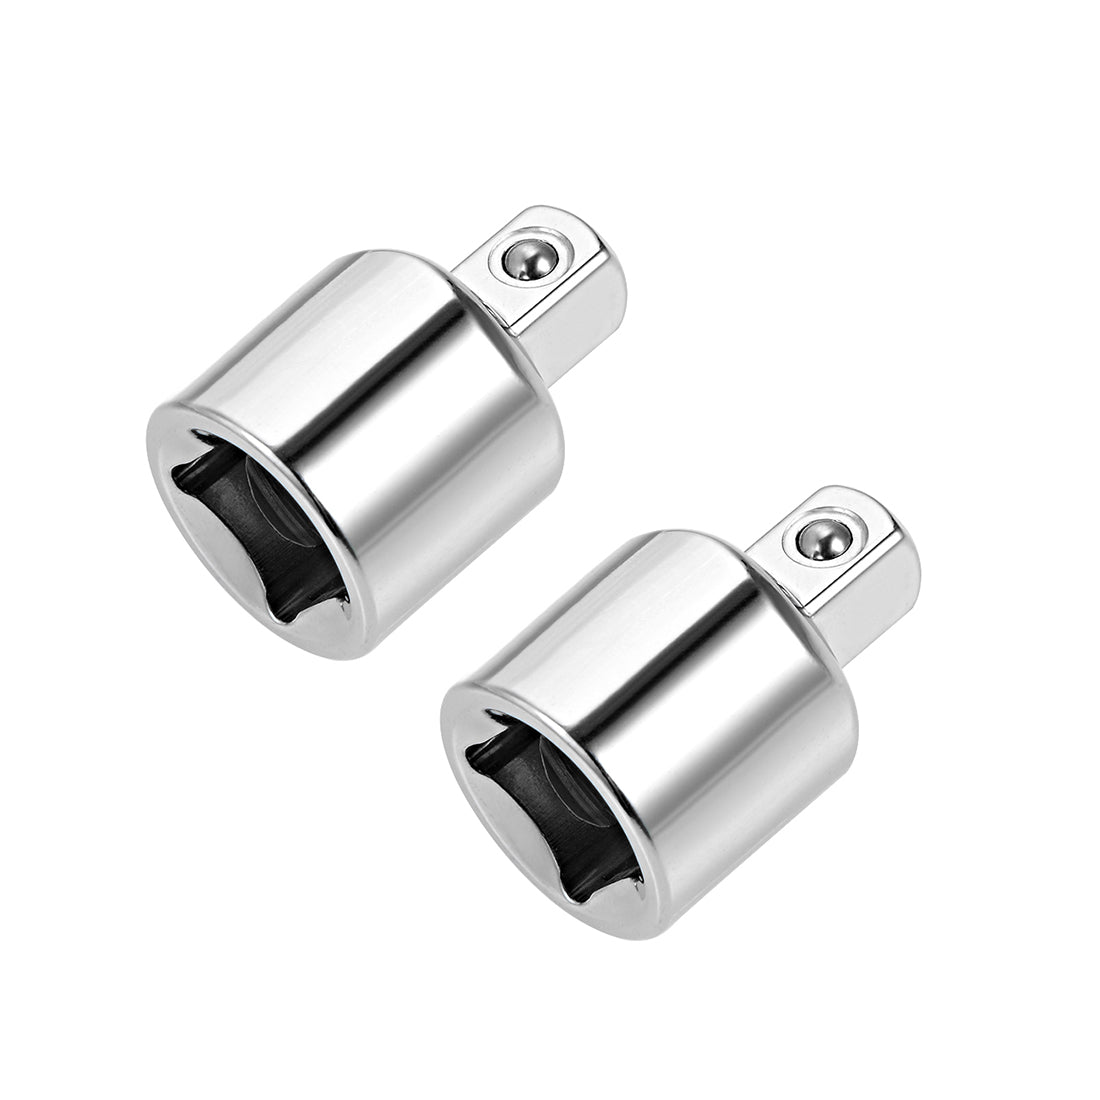 Uxcell Uxcell 2 Pcs 1/2" Drive F x 3/8" M Socket Reducer for Ratchet Wrenches, Female to Male